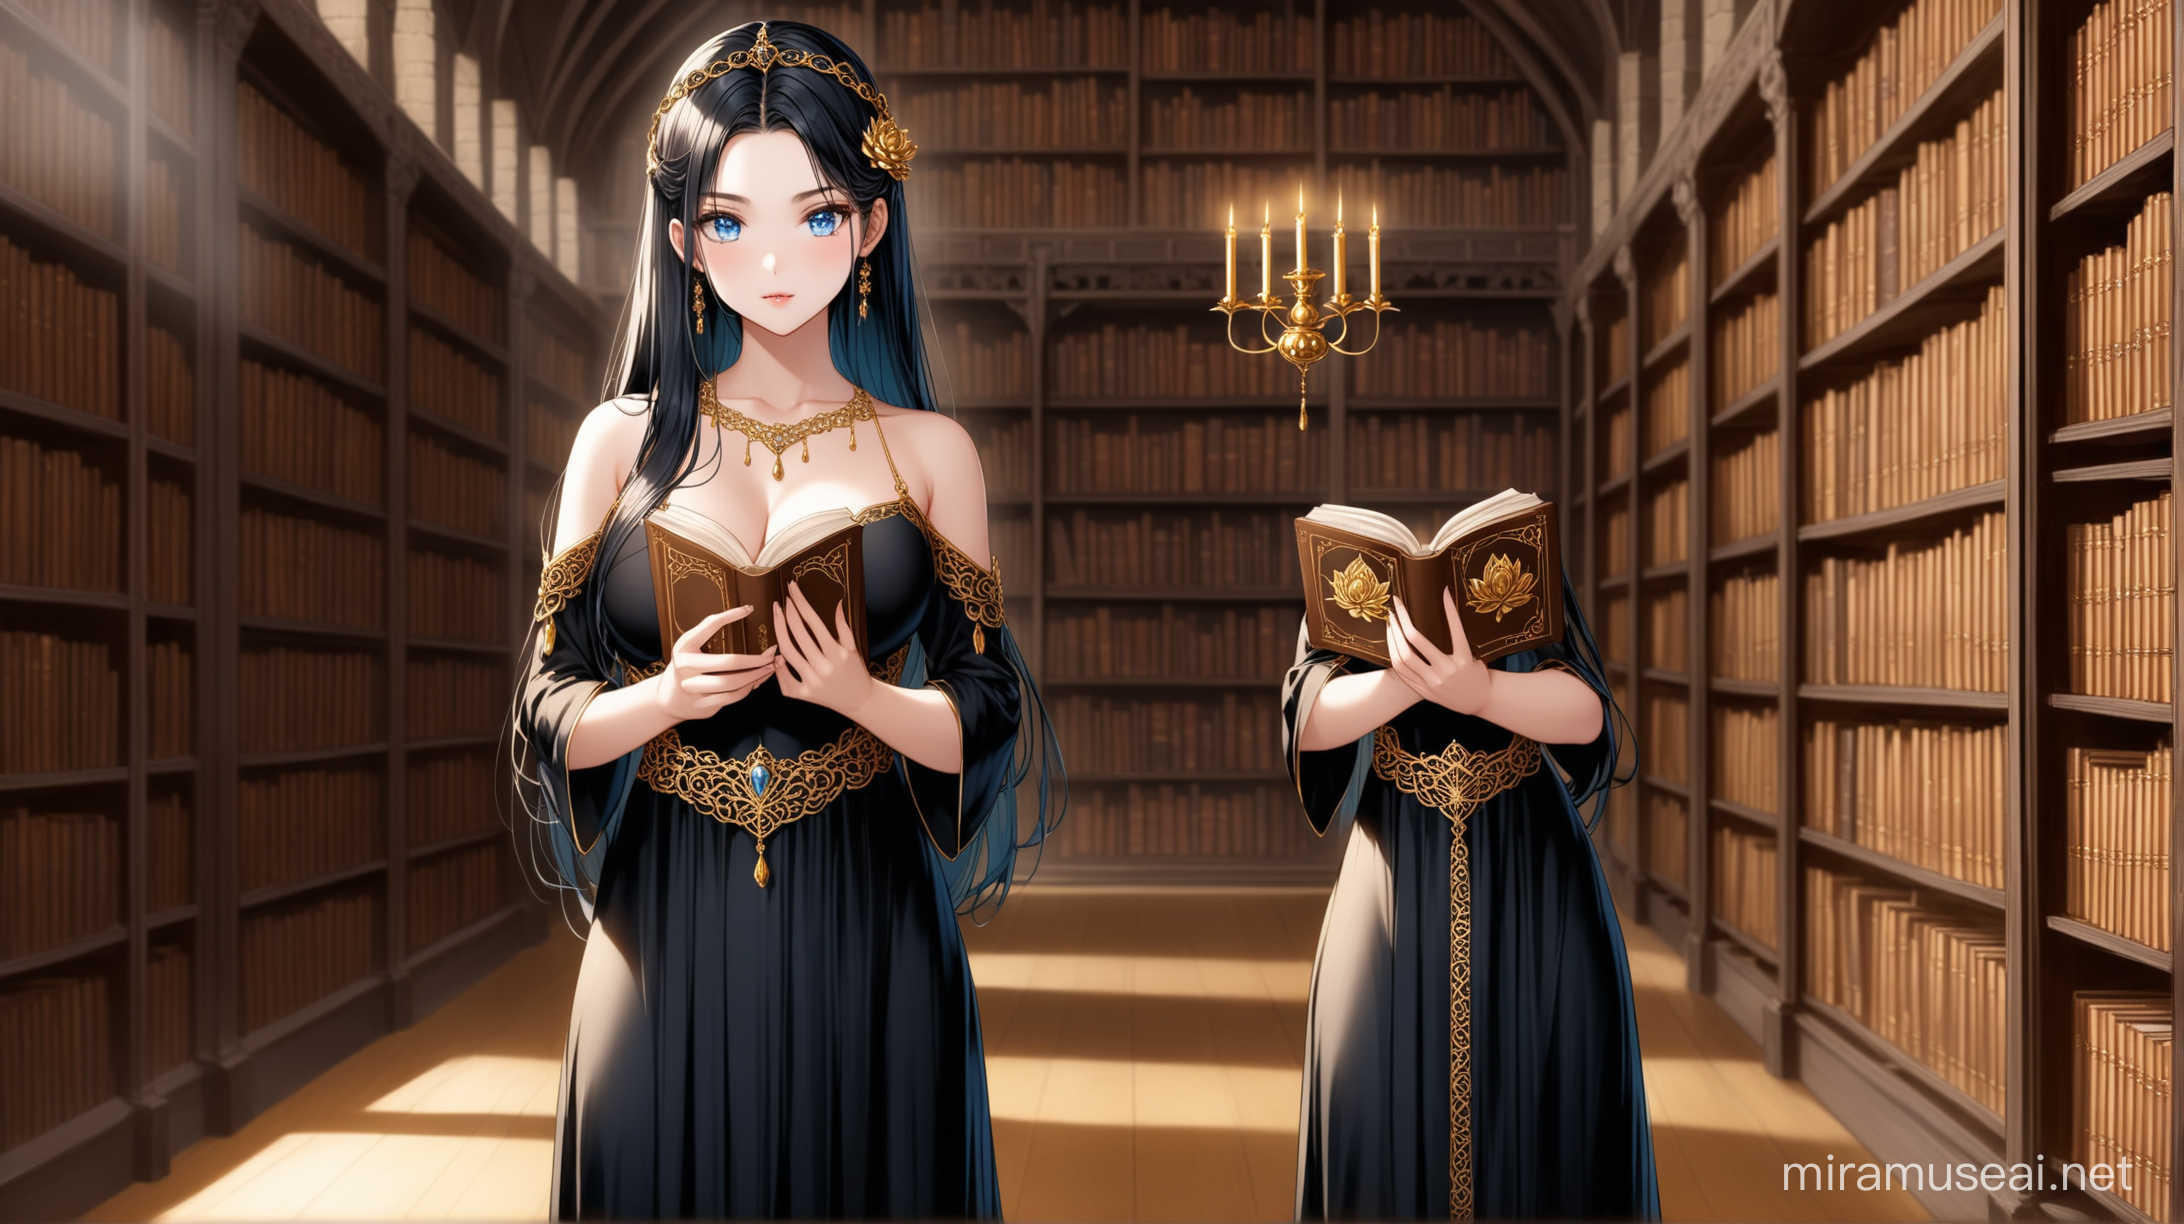 Seductive Woman in Black Dress Reading Book in Medieval Library